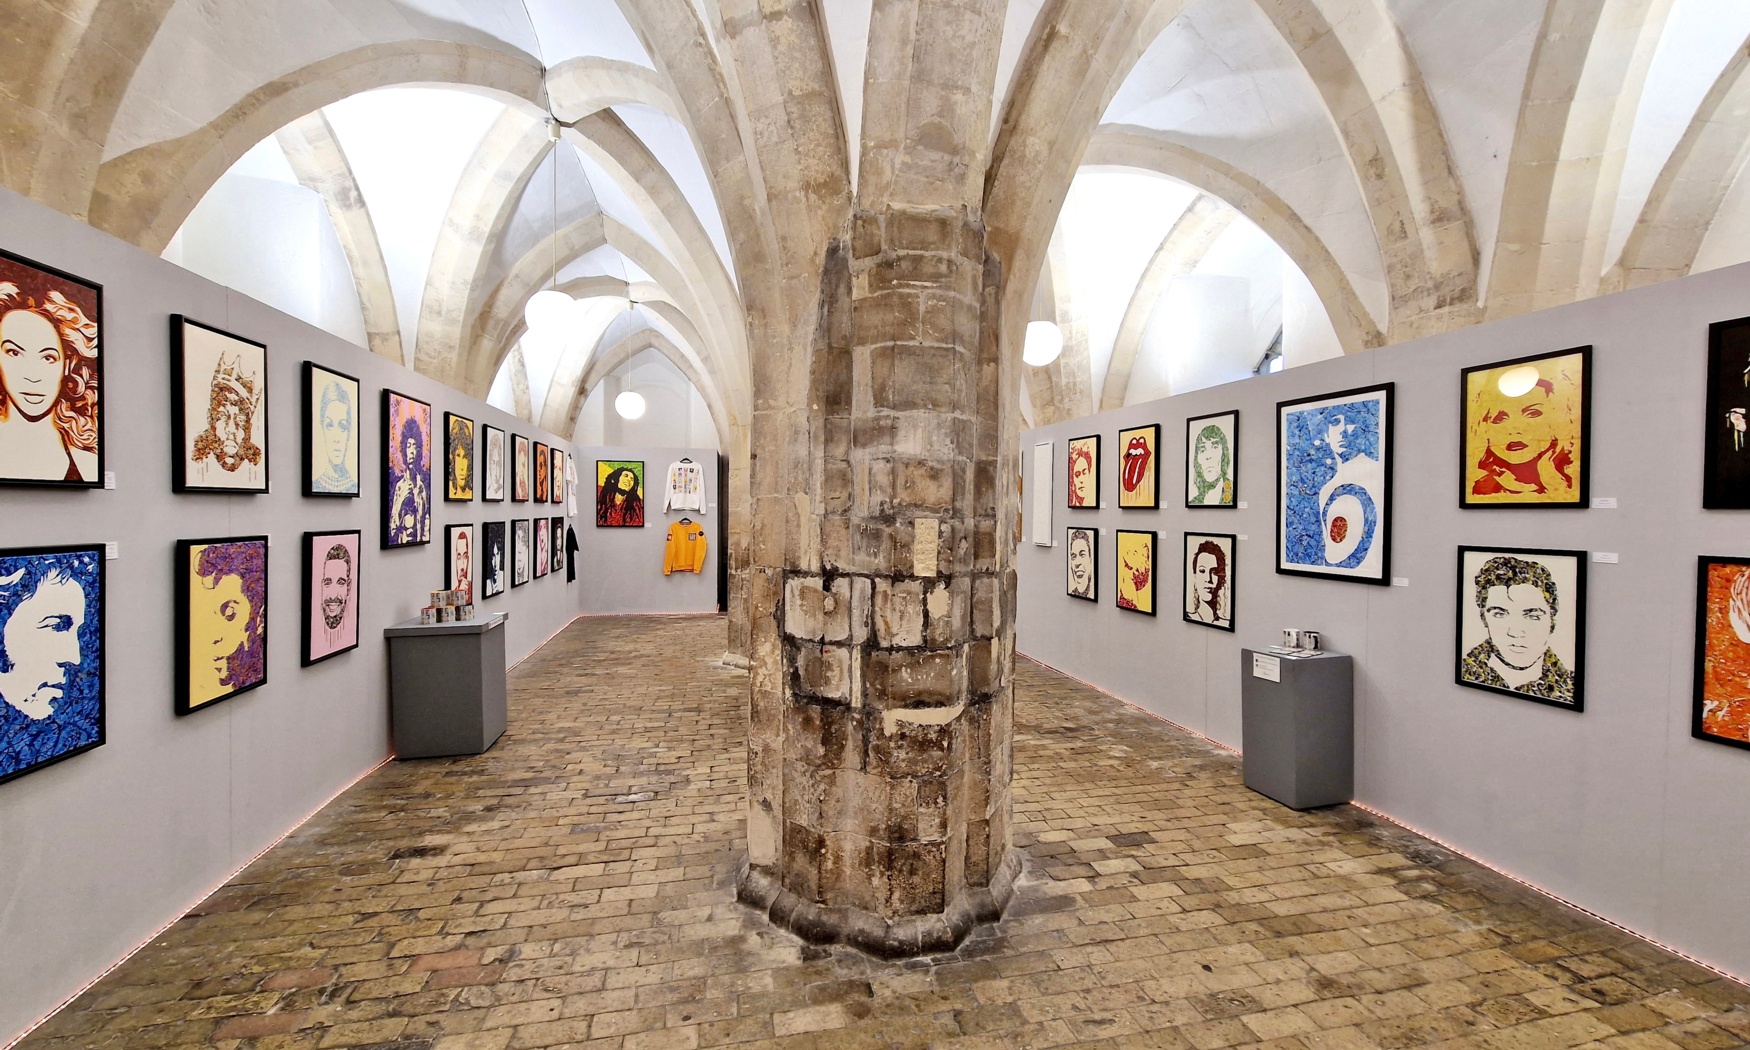 Norwich-born pop artist Kerwin Blackburn exhibits his Jackson Pollock-inspired, music themed paintings in Norwich School's Crypt Gallery, March 2022